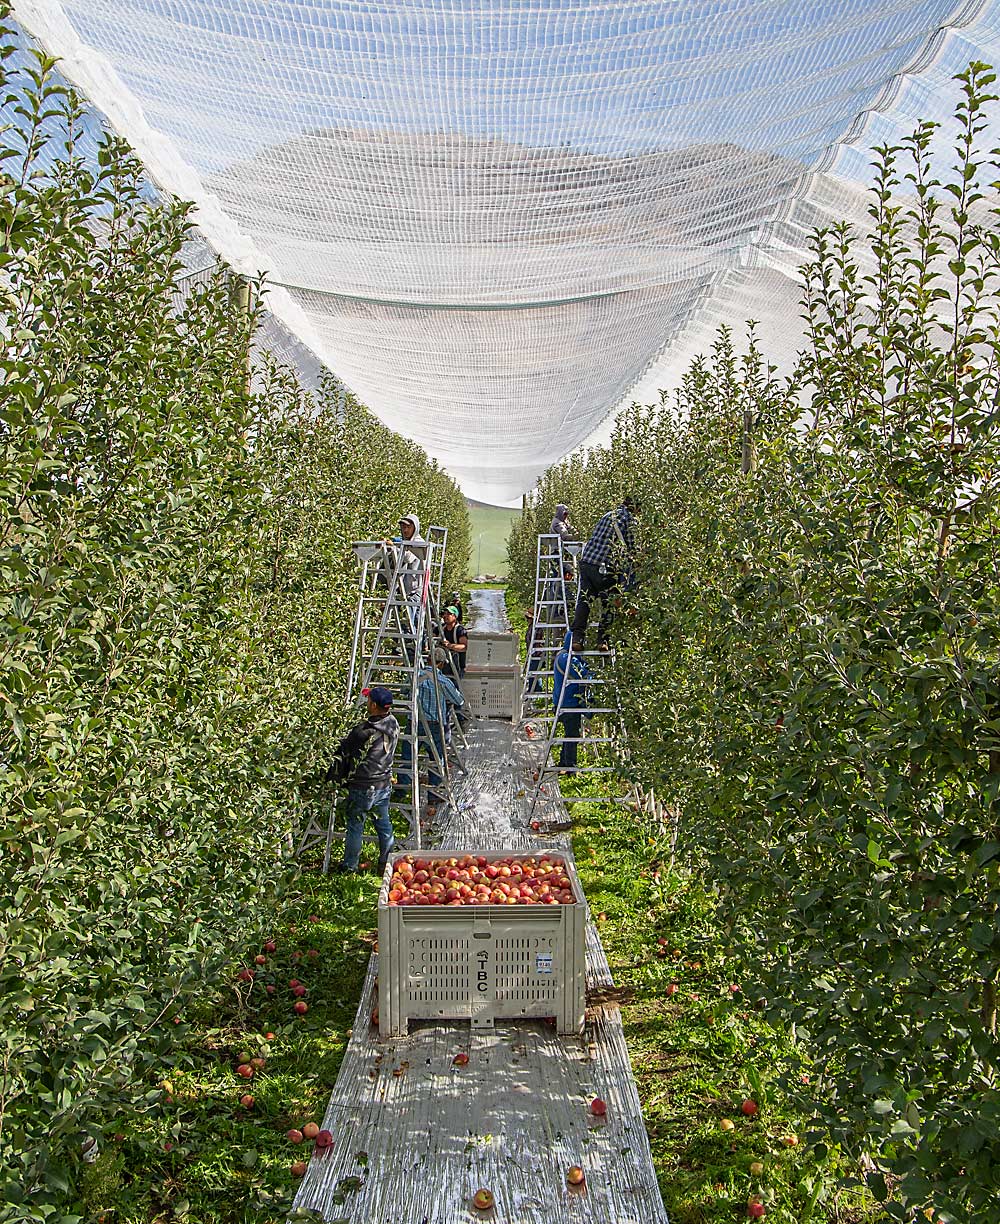 Workers pick SugarBee apples under netting at the farm of Sam and Allen Godwin near Tonasket, Washington. Few growers use netting in the relatively cool region. The Godwins are experimenting with it as much for codling moth control as they are for sunburn prevention. (Ross Courtney/Good Fruit Grower)